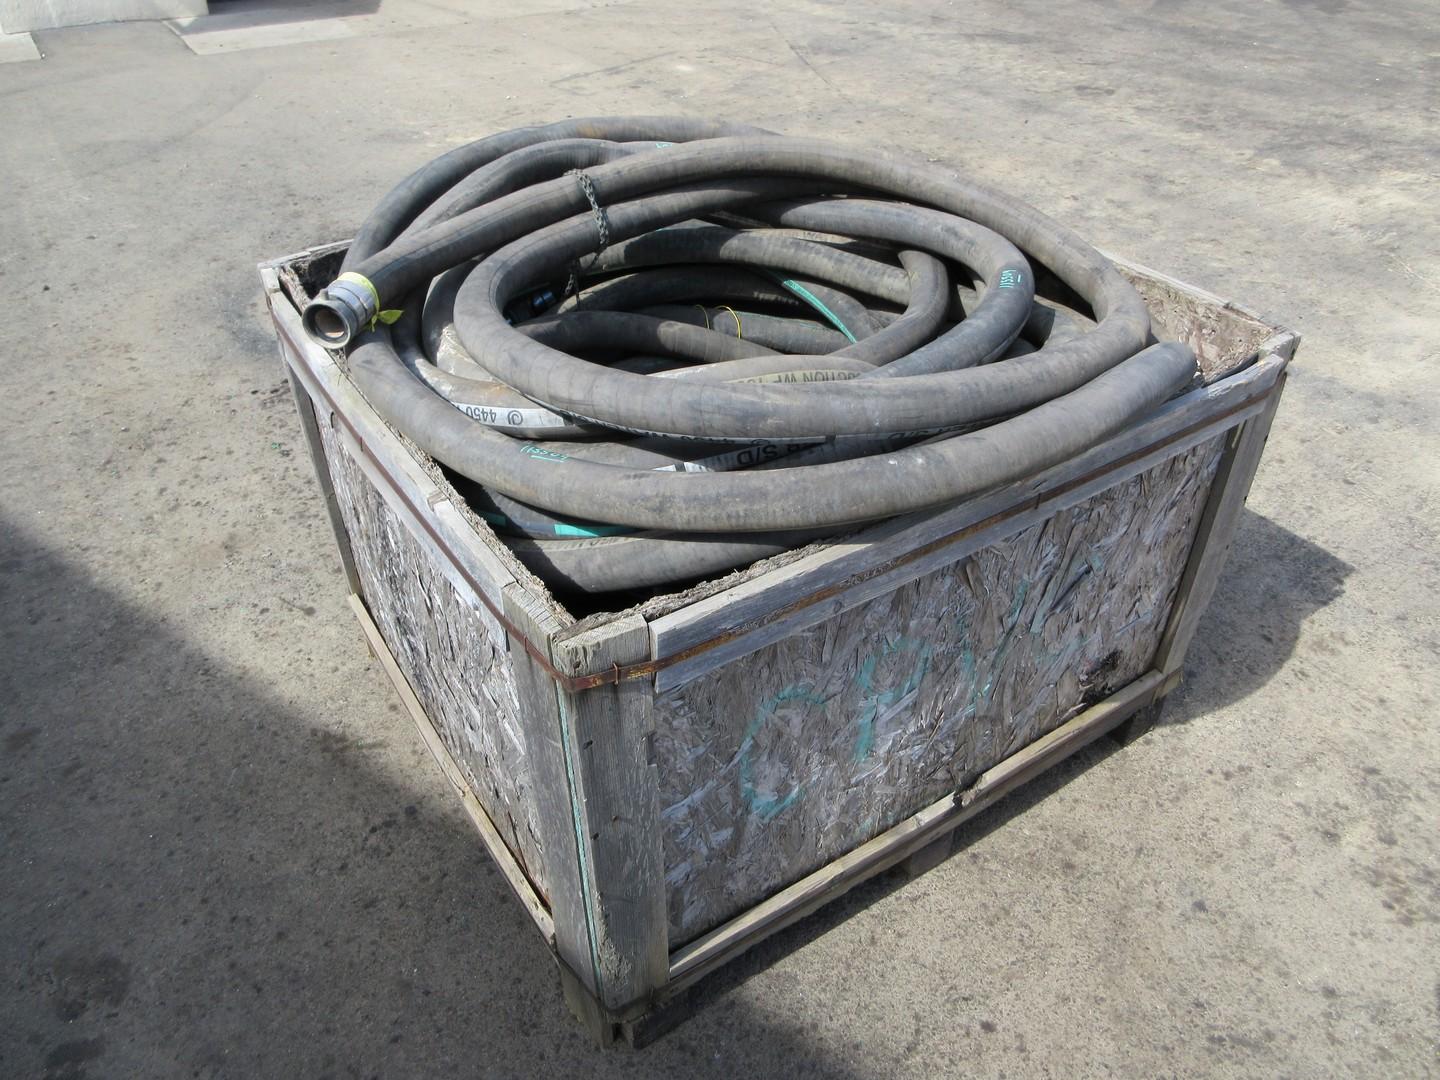 Quantity of Water Hose